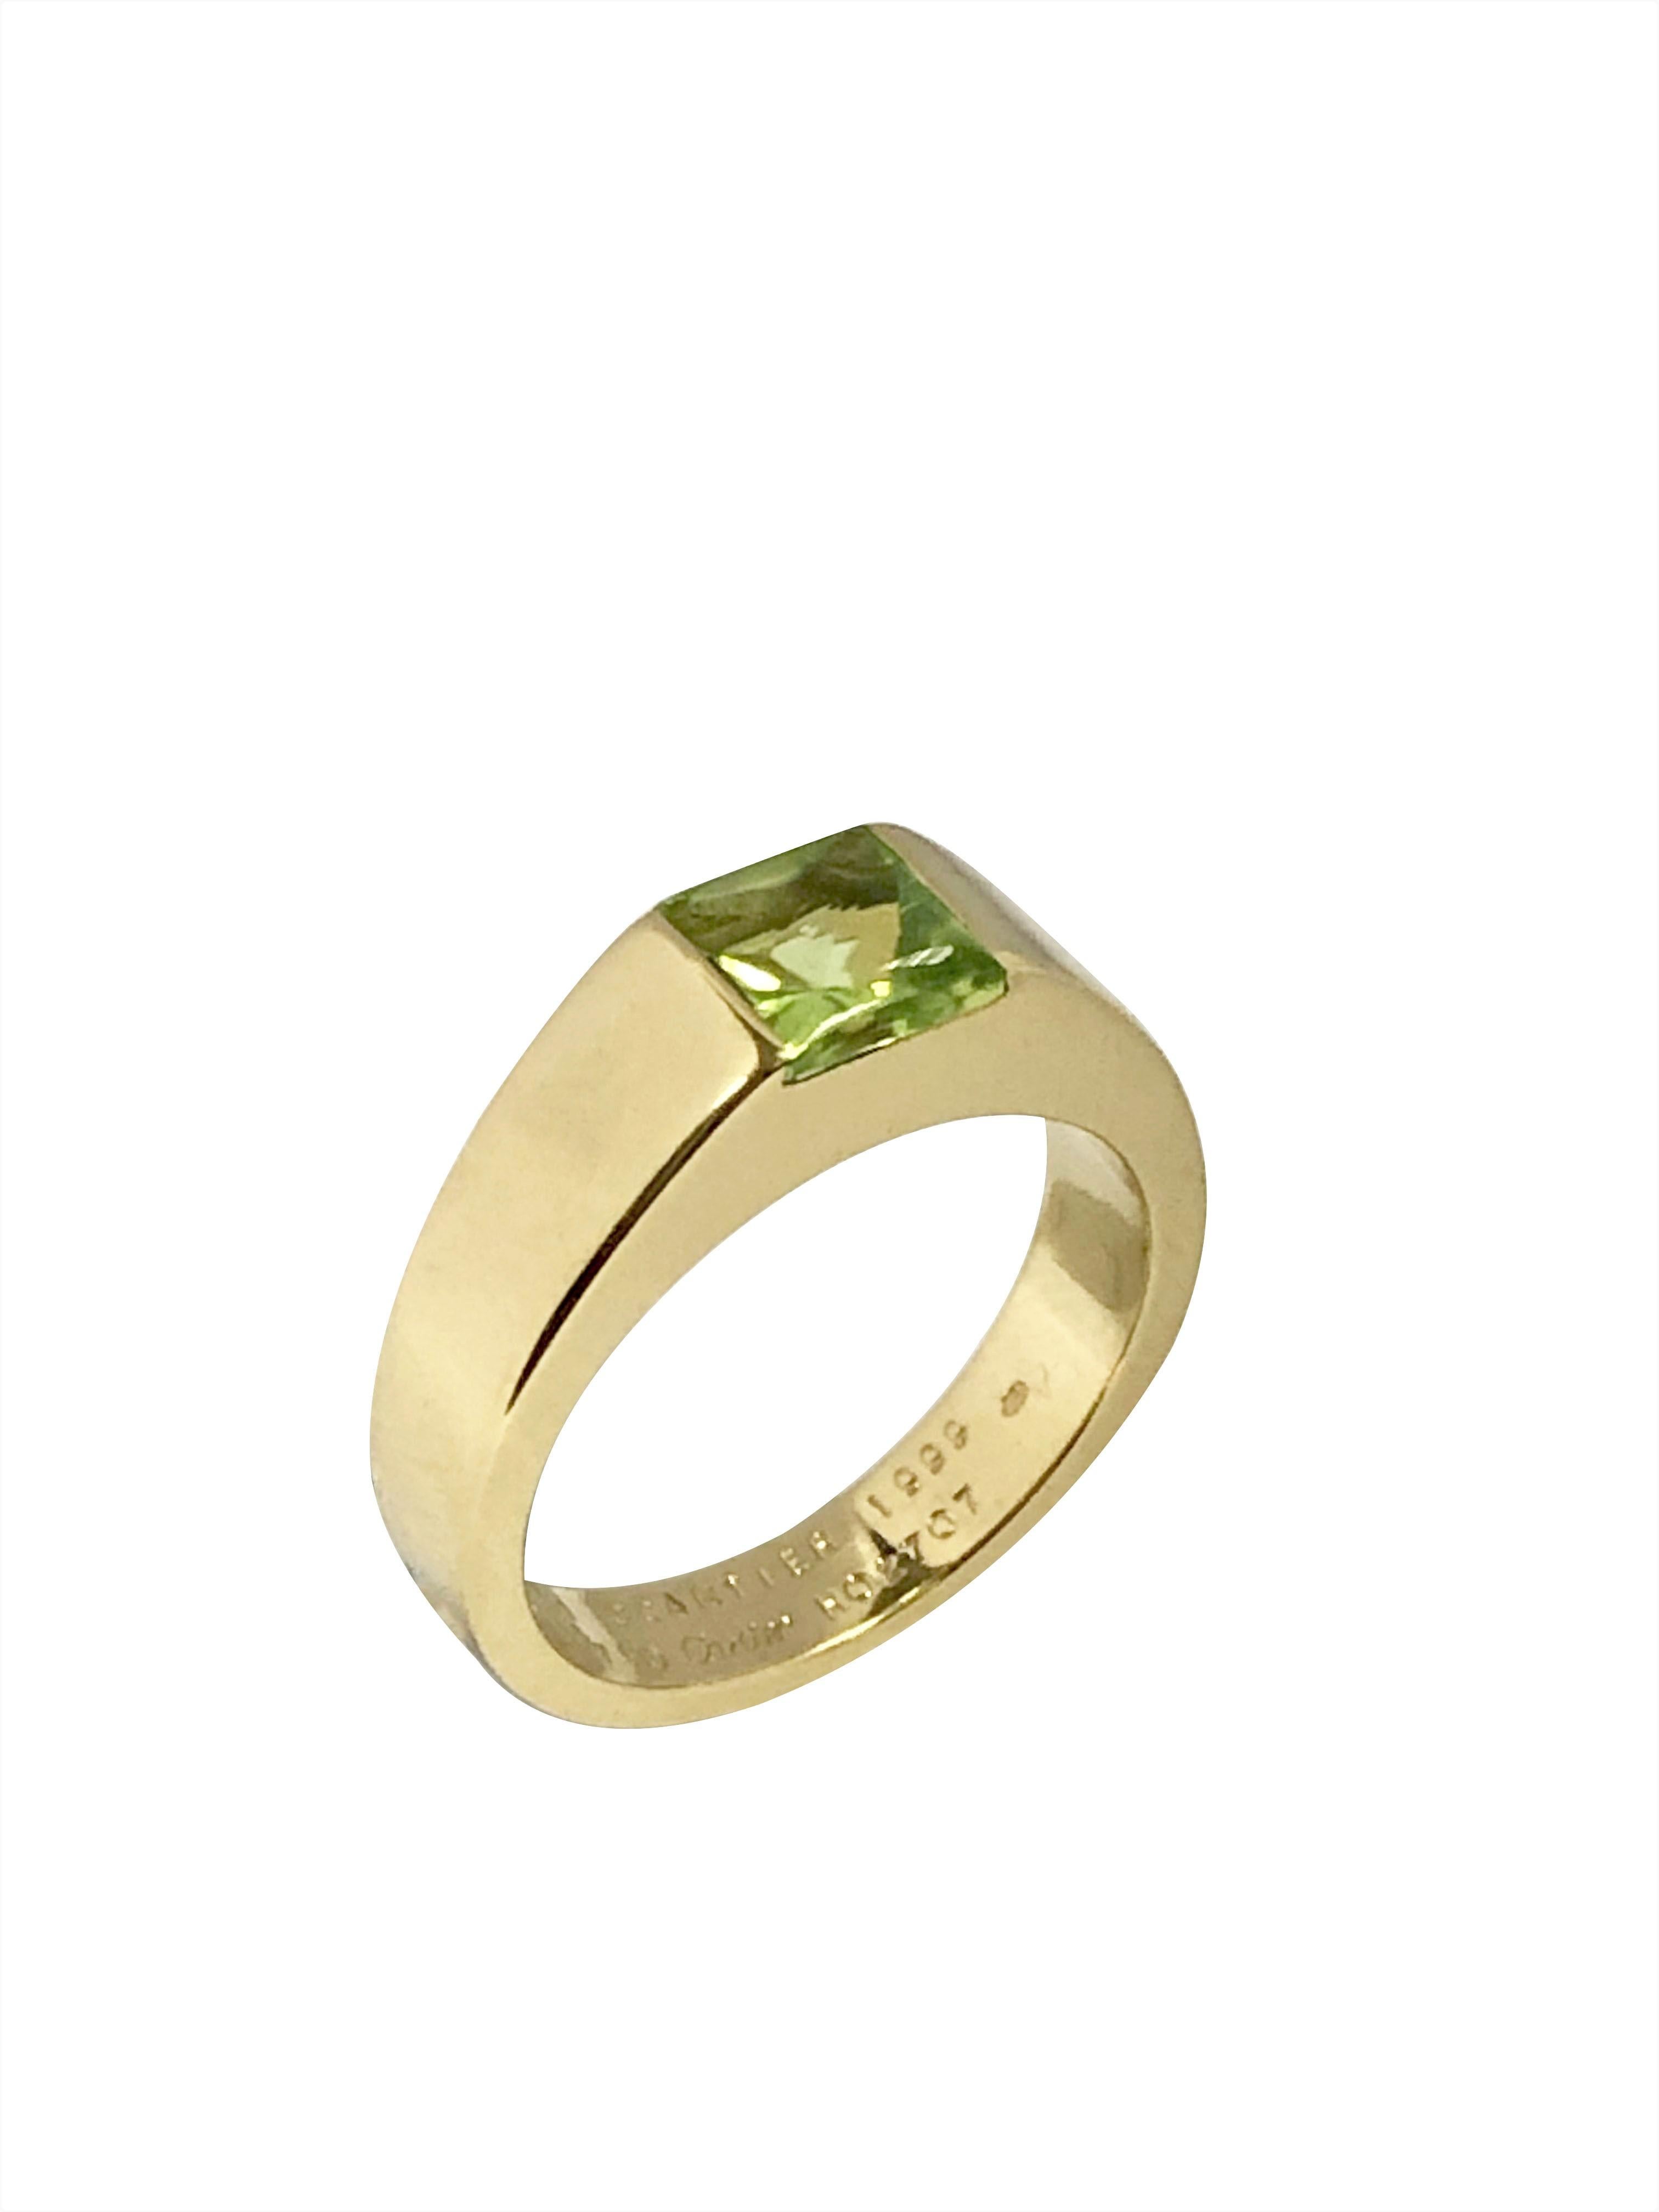 Circa 2010 Cartier Tank collection 18K Yellow Gold Ring, centrally set with a Square Cushion Cabochon top and faceted bottom Fine color Peridot, finger size 5 3/4, comes in the original Cartier Presentation box. 